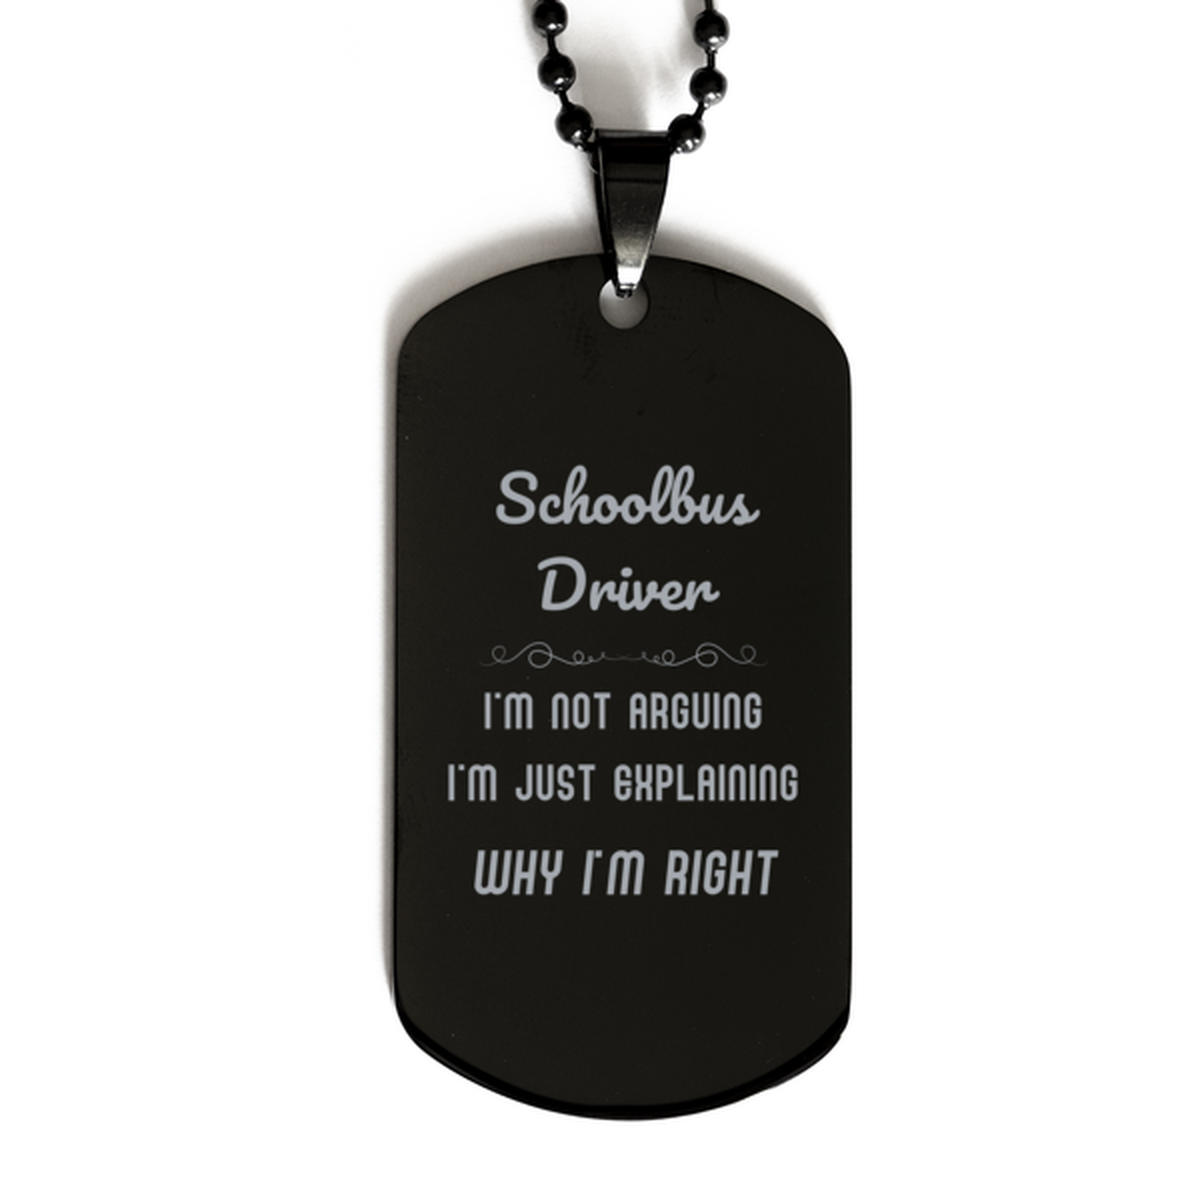 Schoolbus Driver I'm not Arguing. I'm Just Explaining Why I'm RIGHT Black Dog Tag, Funny Saying Quote Schoolbus Driver Gifts For Schoolbus Driver Graduation Birthday Christmas Gifts for Men Women Coworker